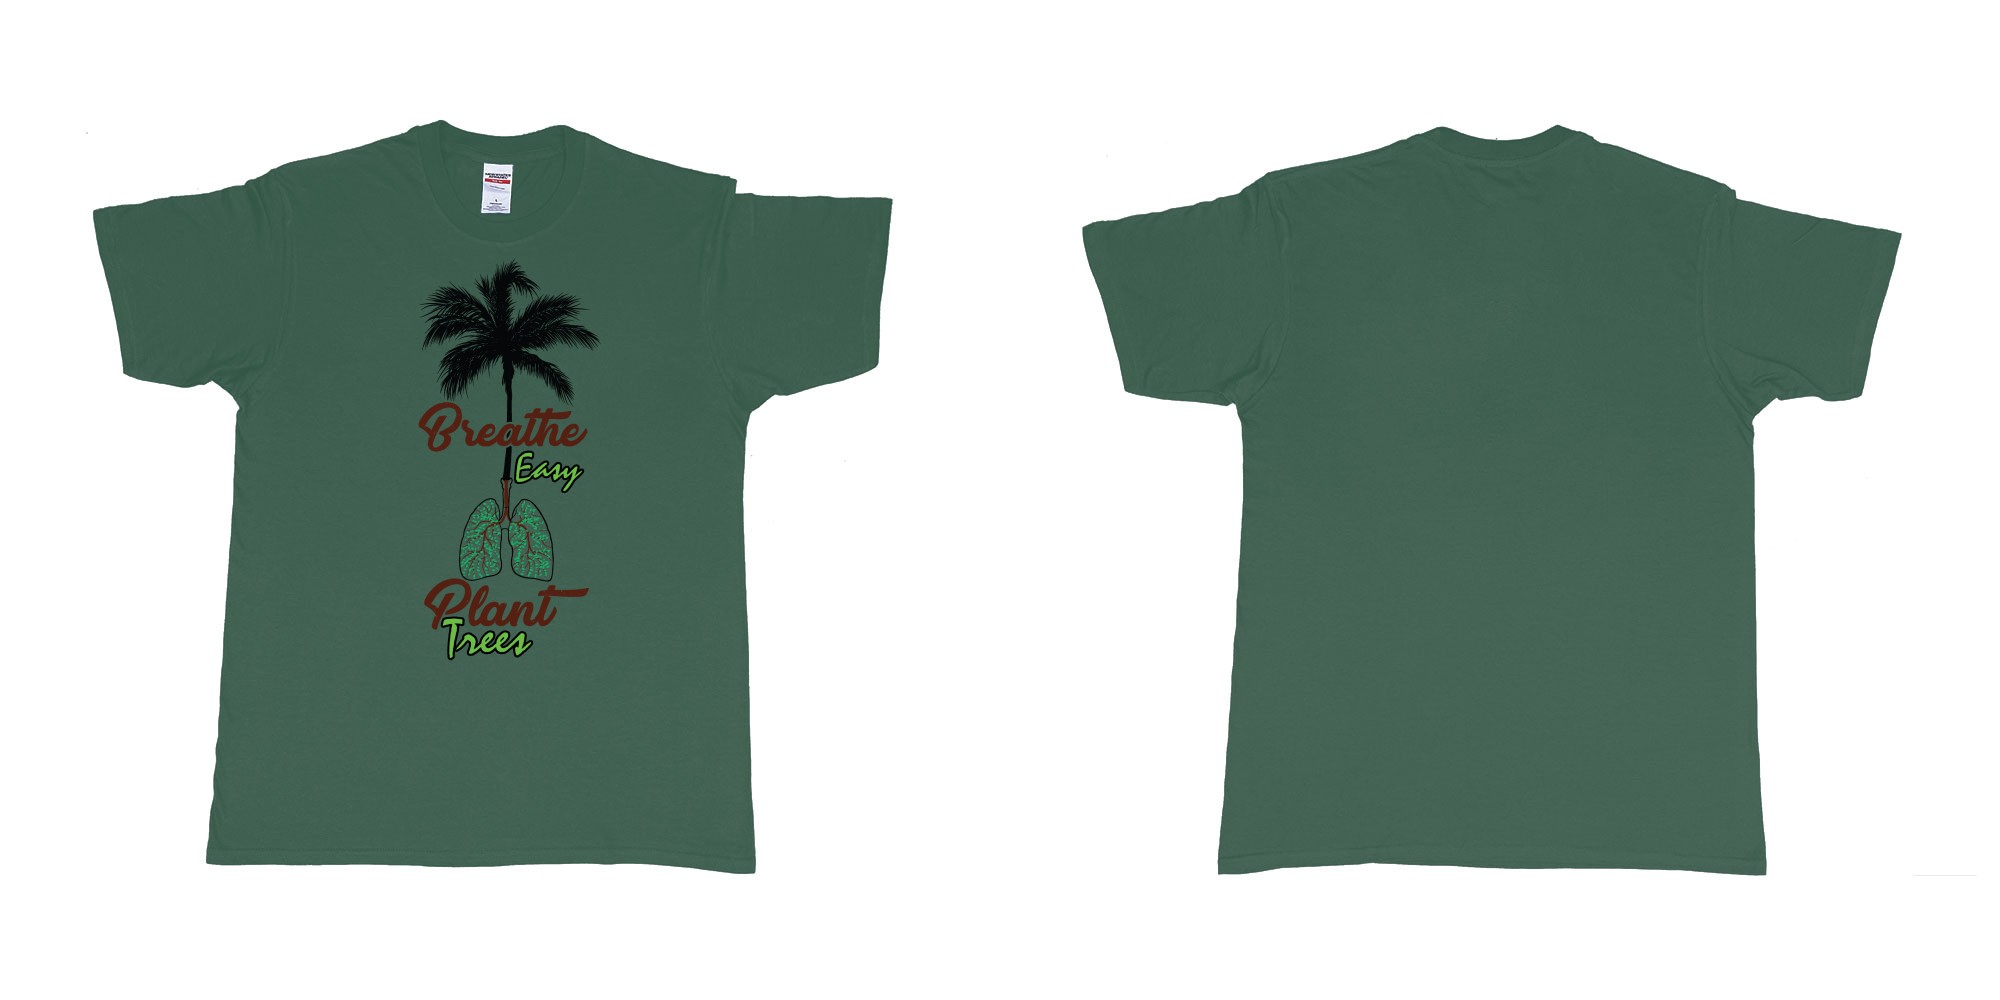 Custom tshirt design breathe easy and plant a tree for better air for everyone in fabric color forest-green choice your own text made in Bali by The Pirate Way